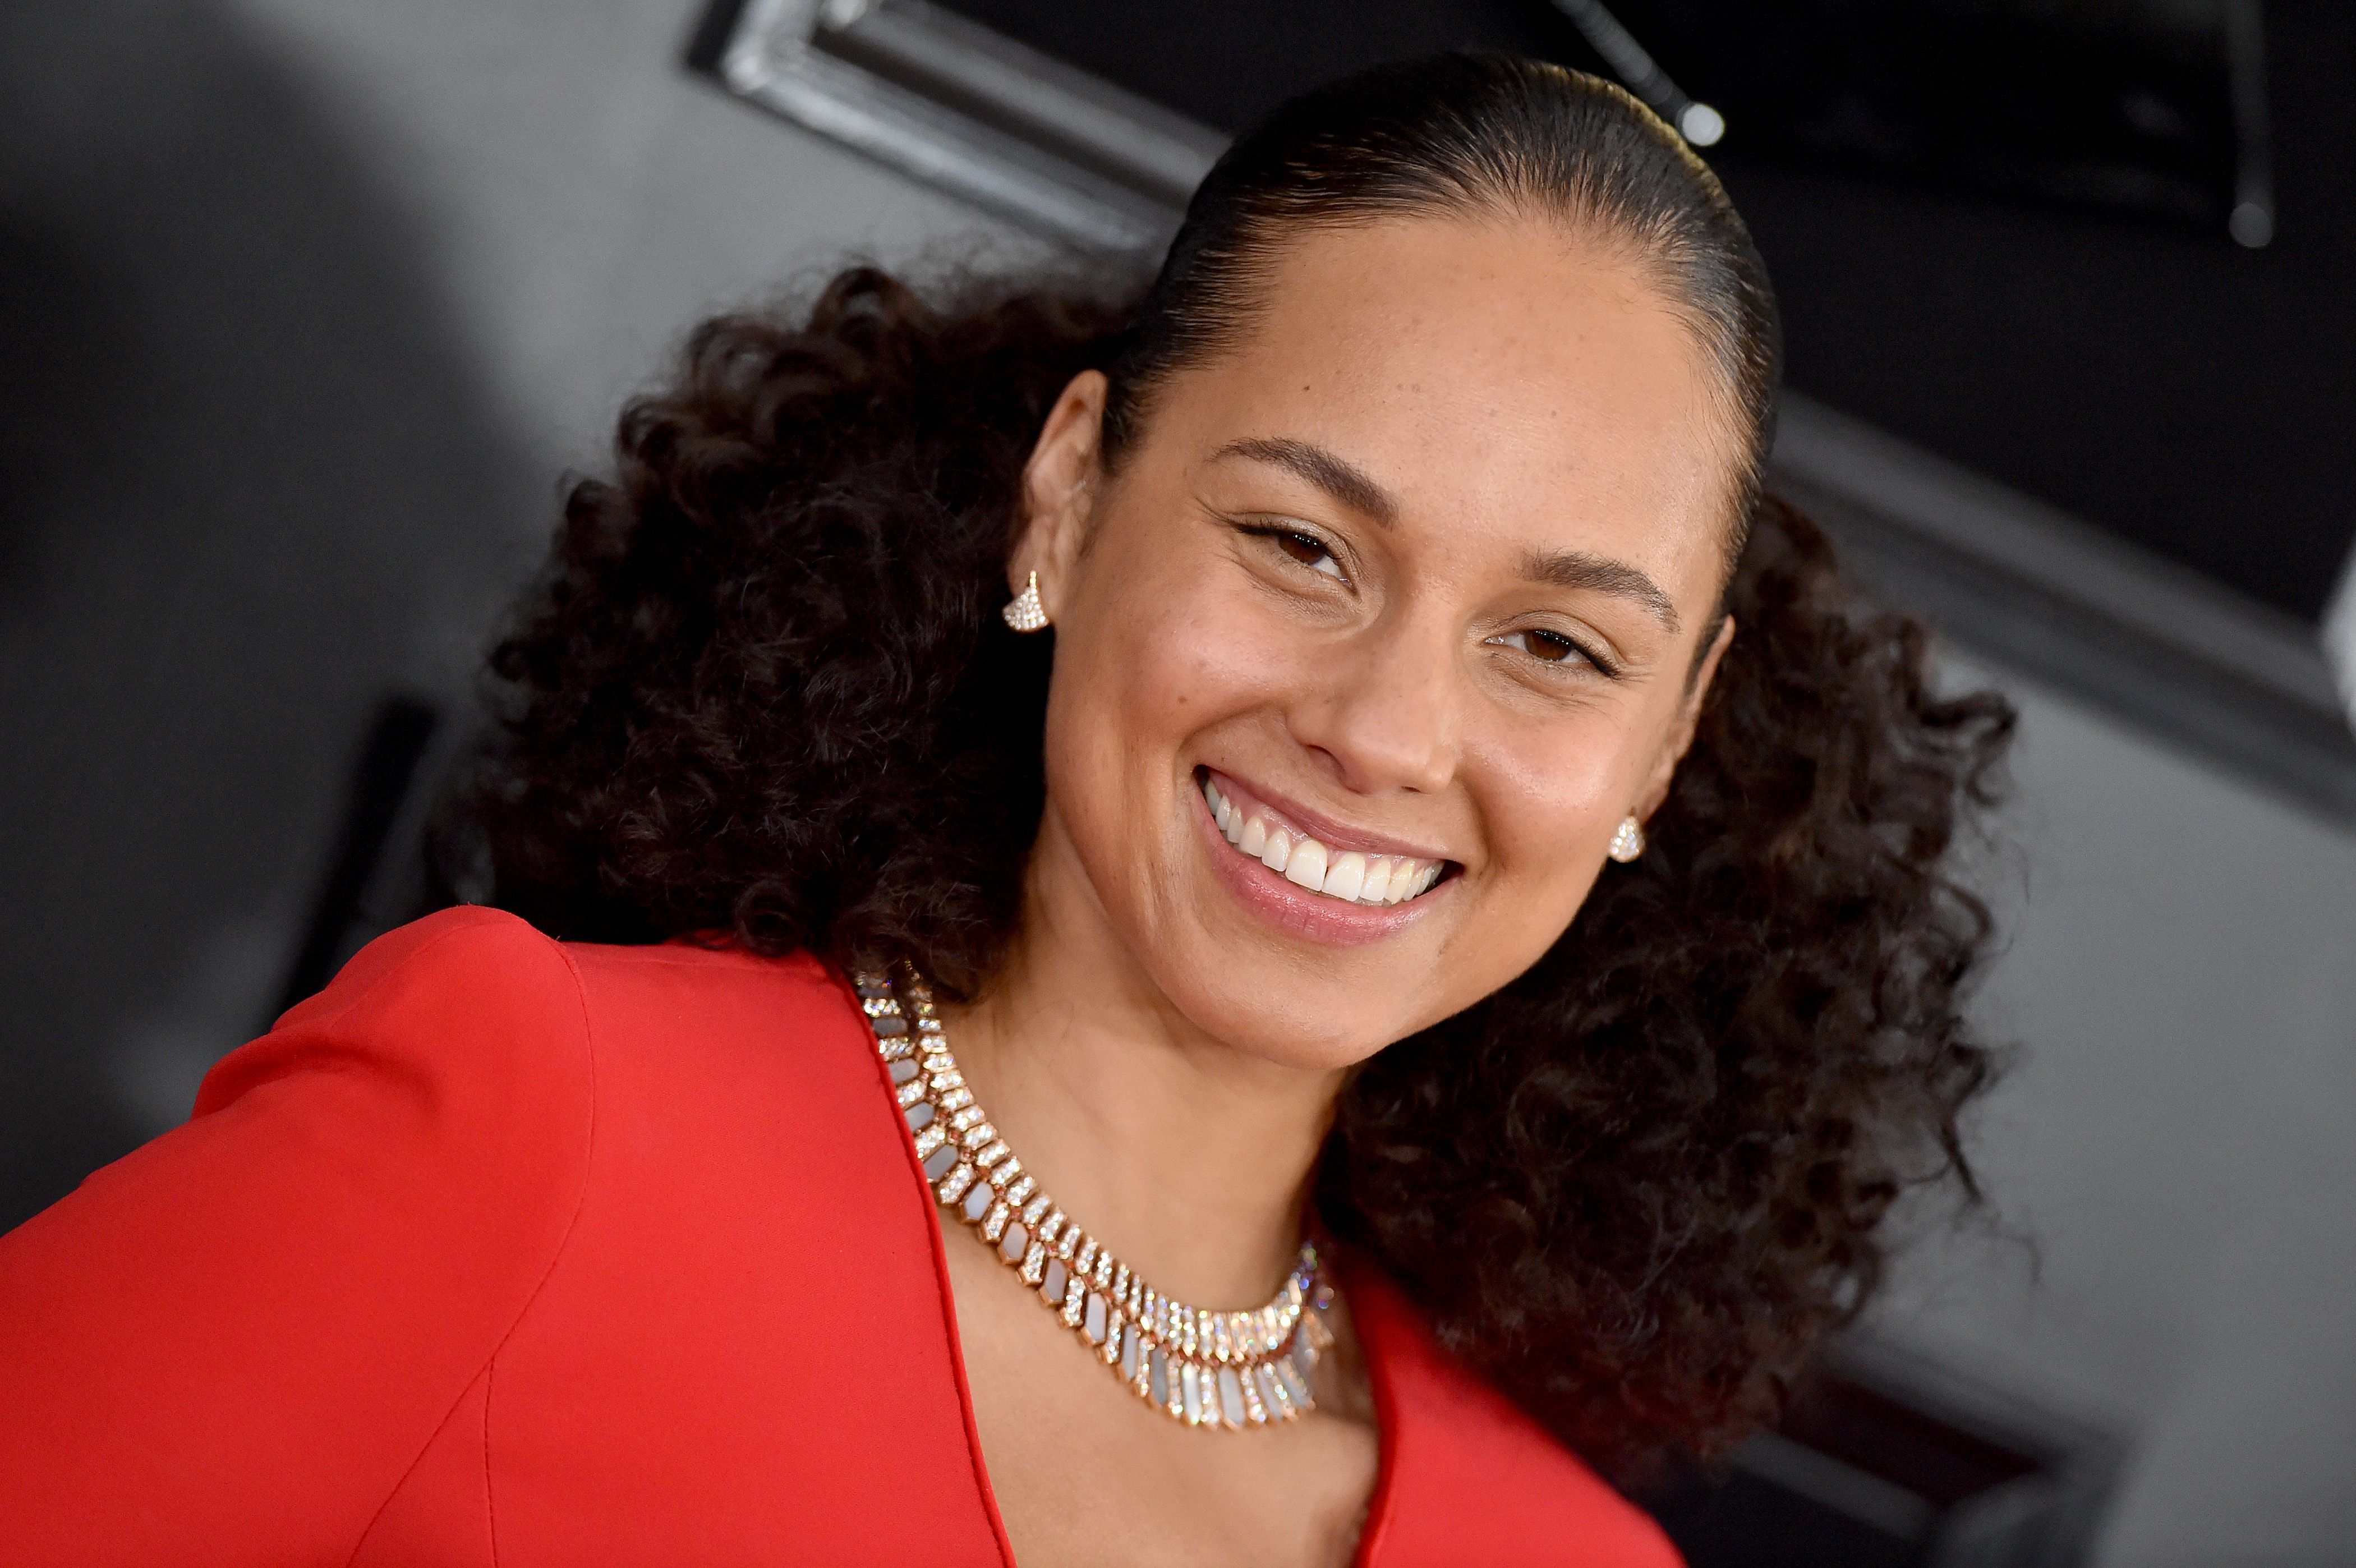 Alicia Keys Launches New Makeup Collection with 'All Our Journeys in Mind